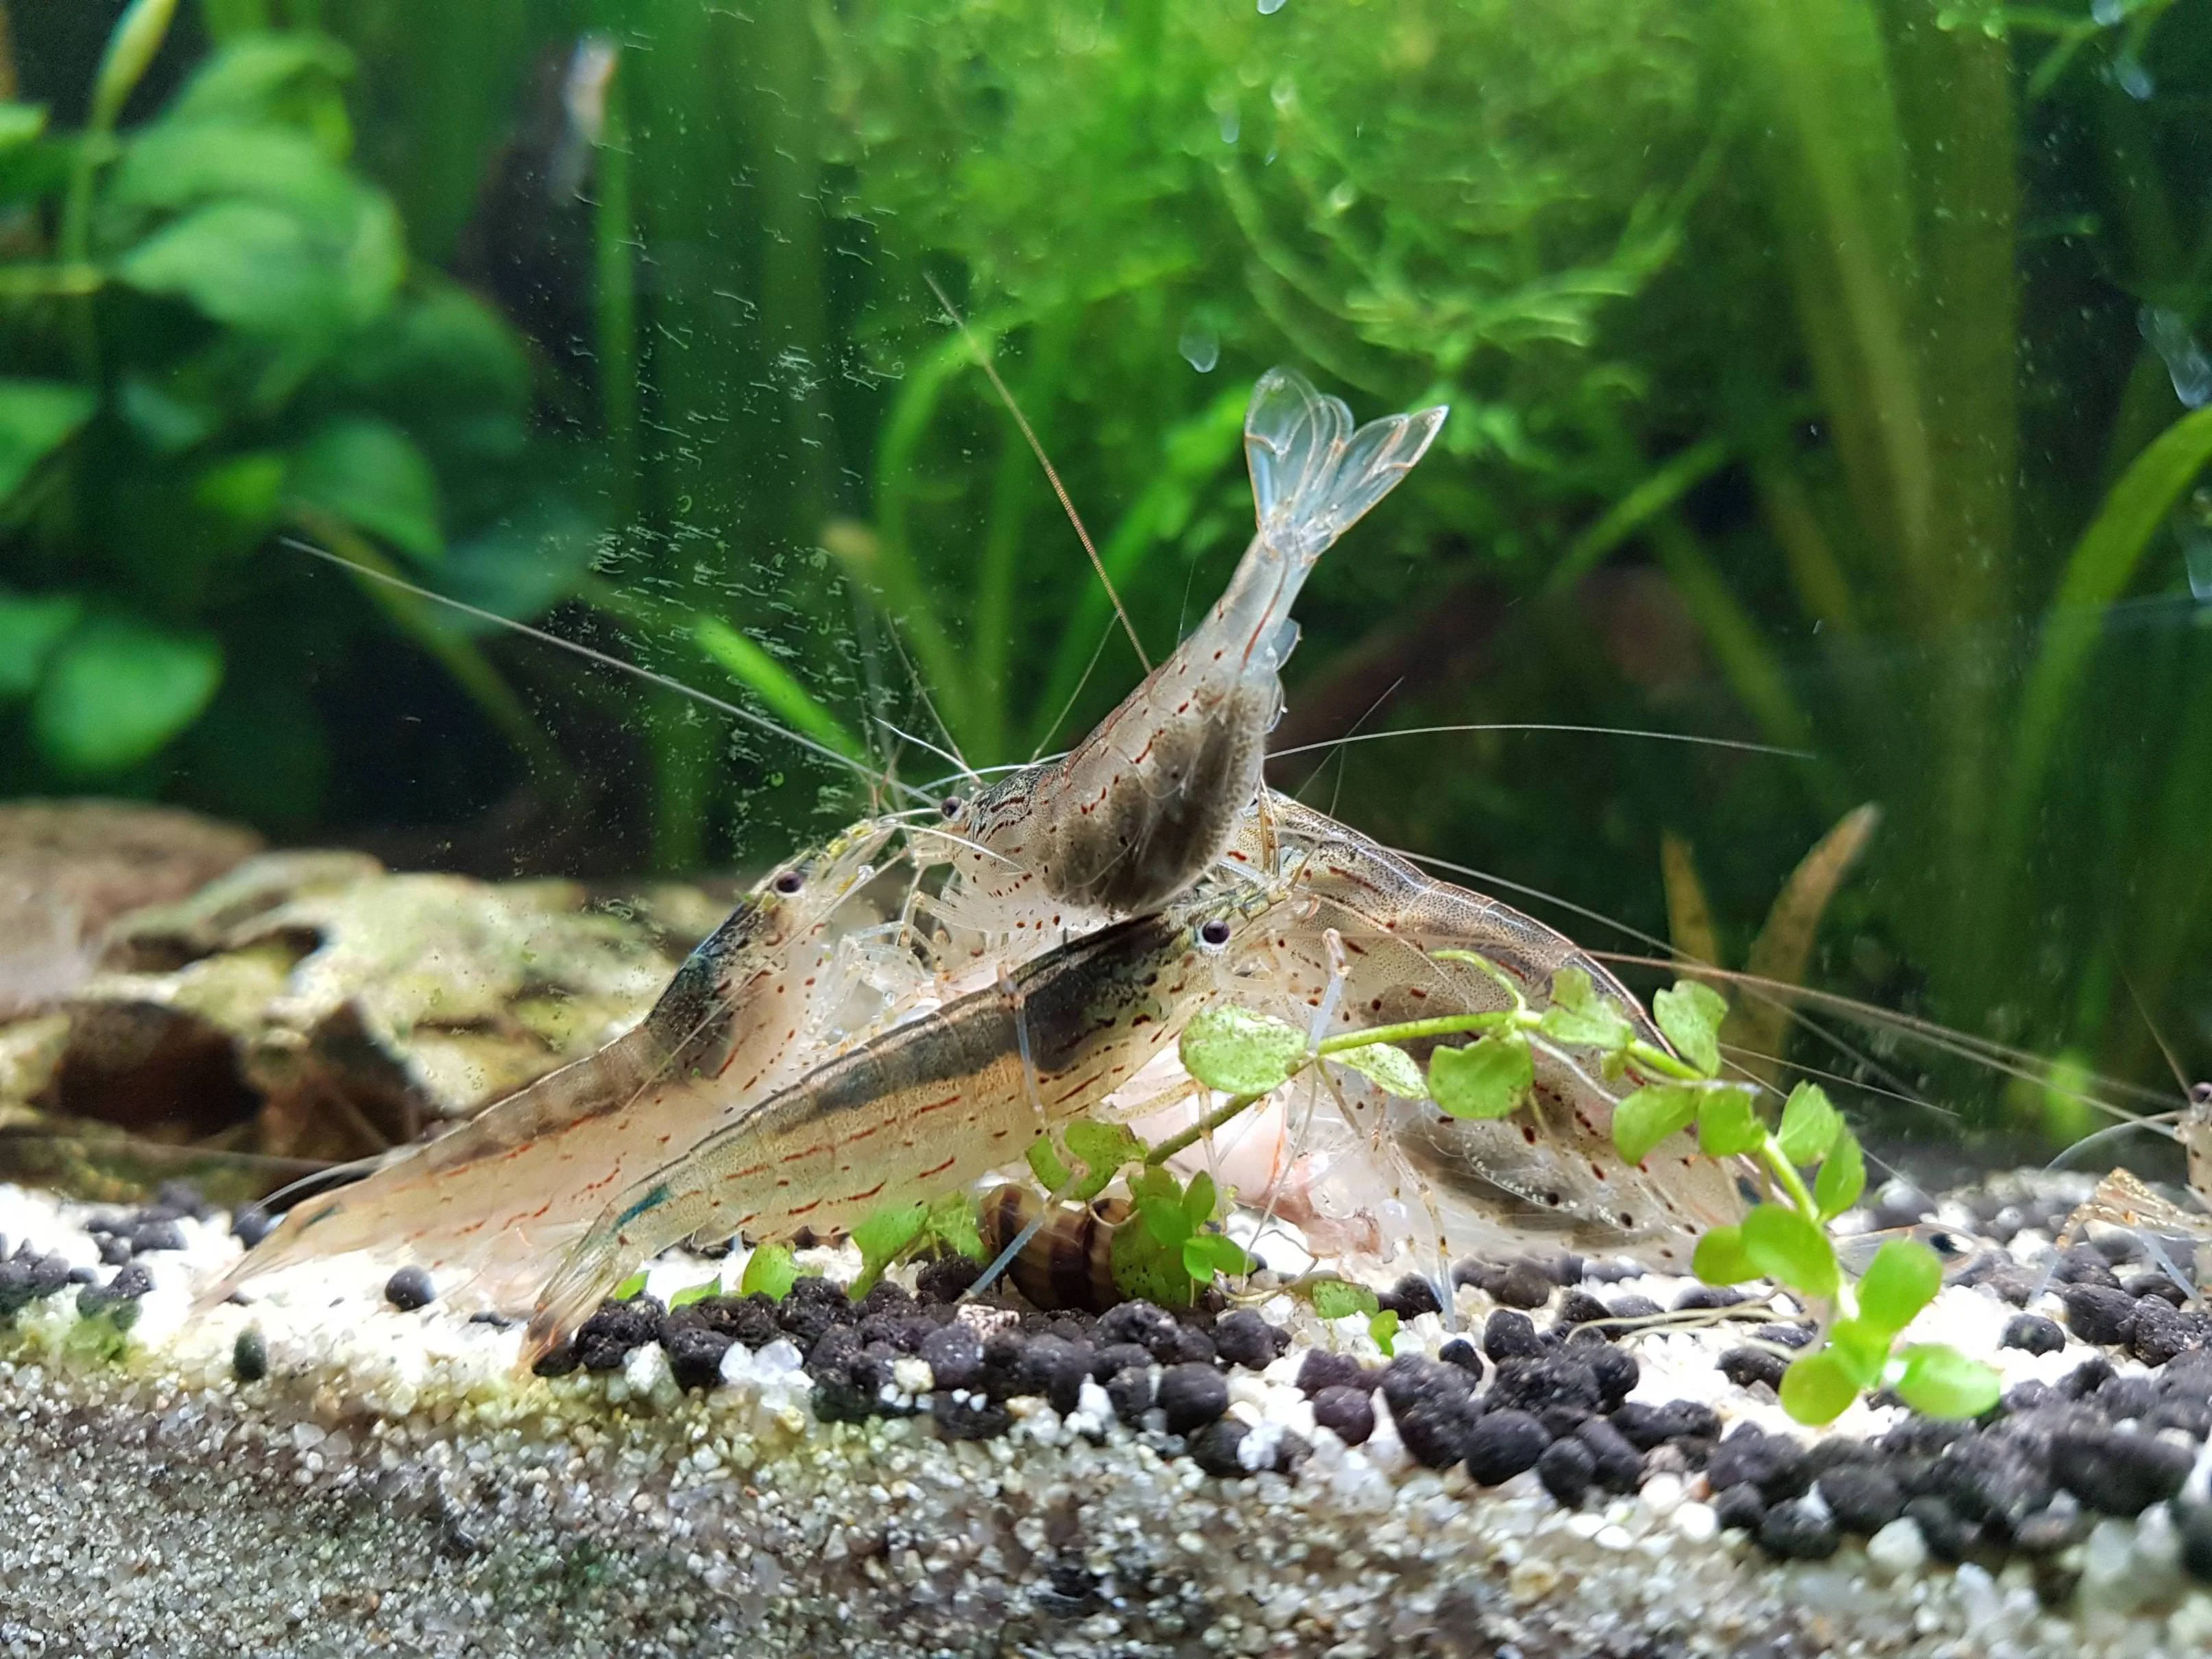 Possible Reasons for Ghost Shrimp Death